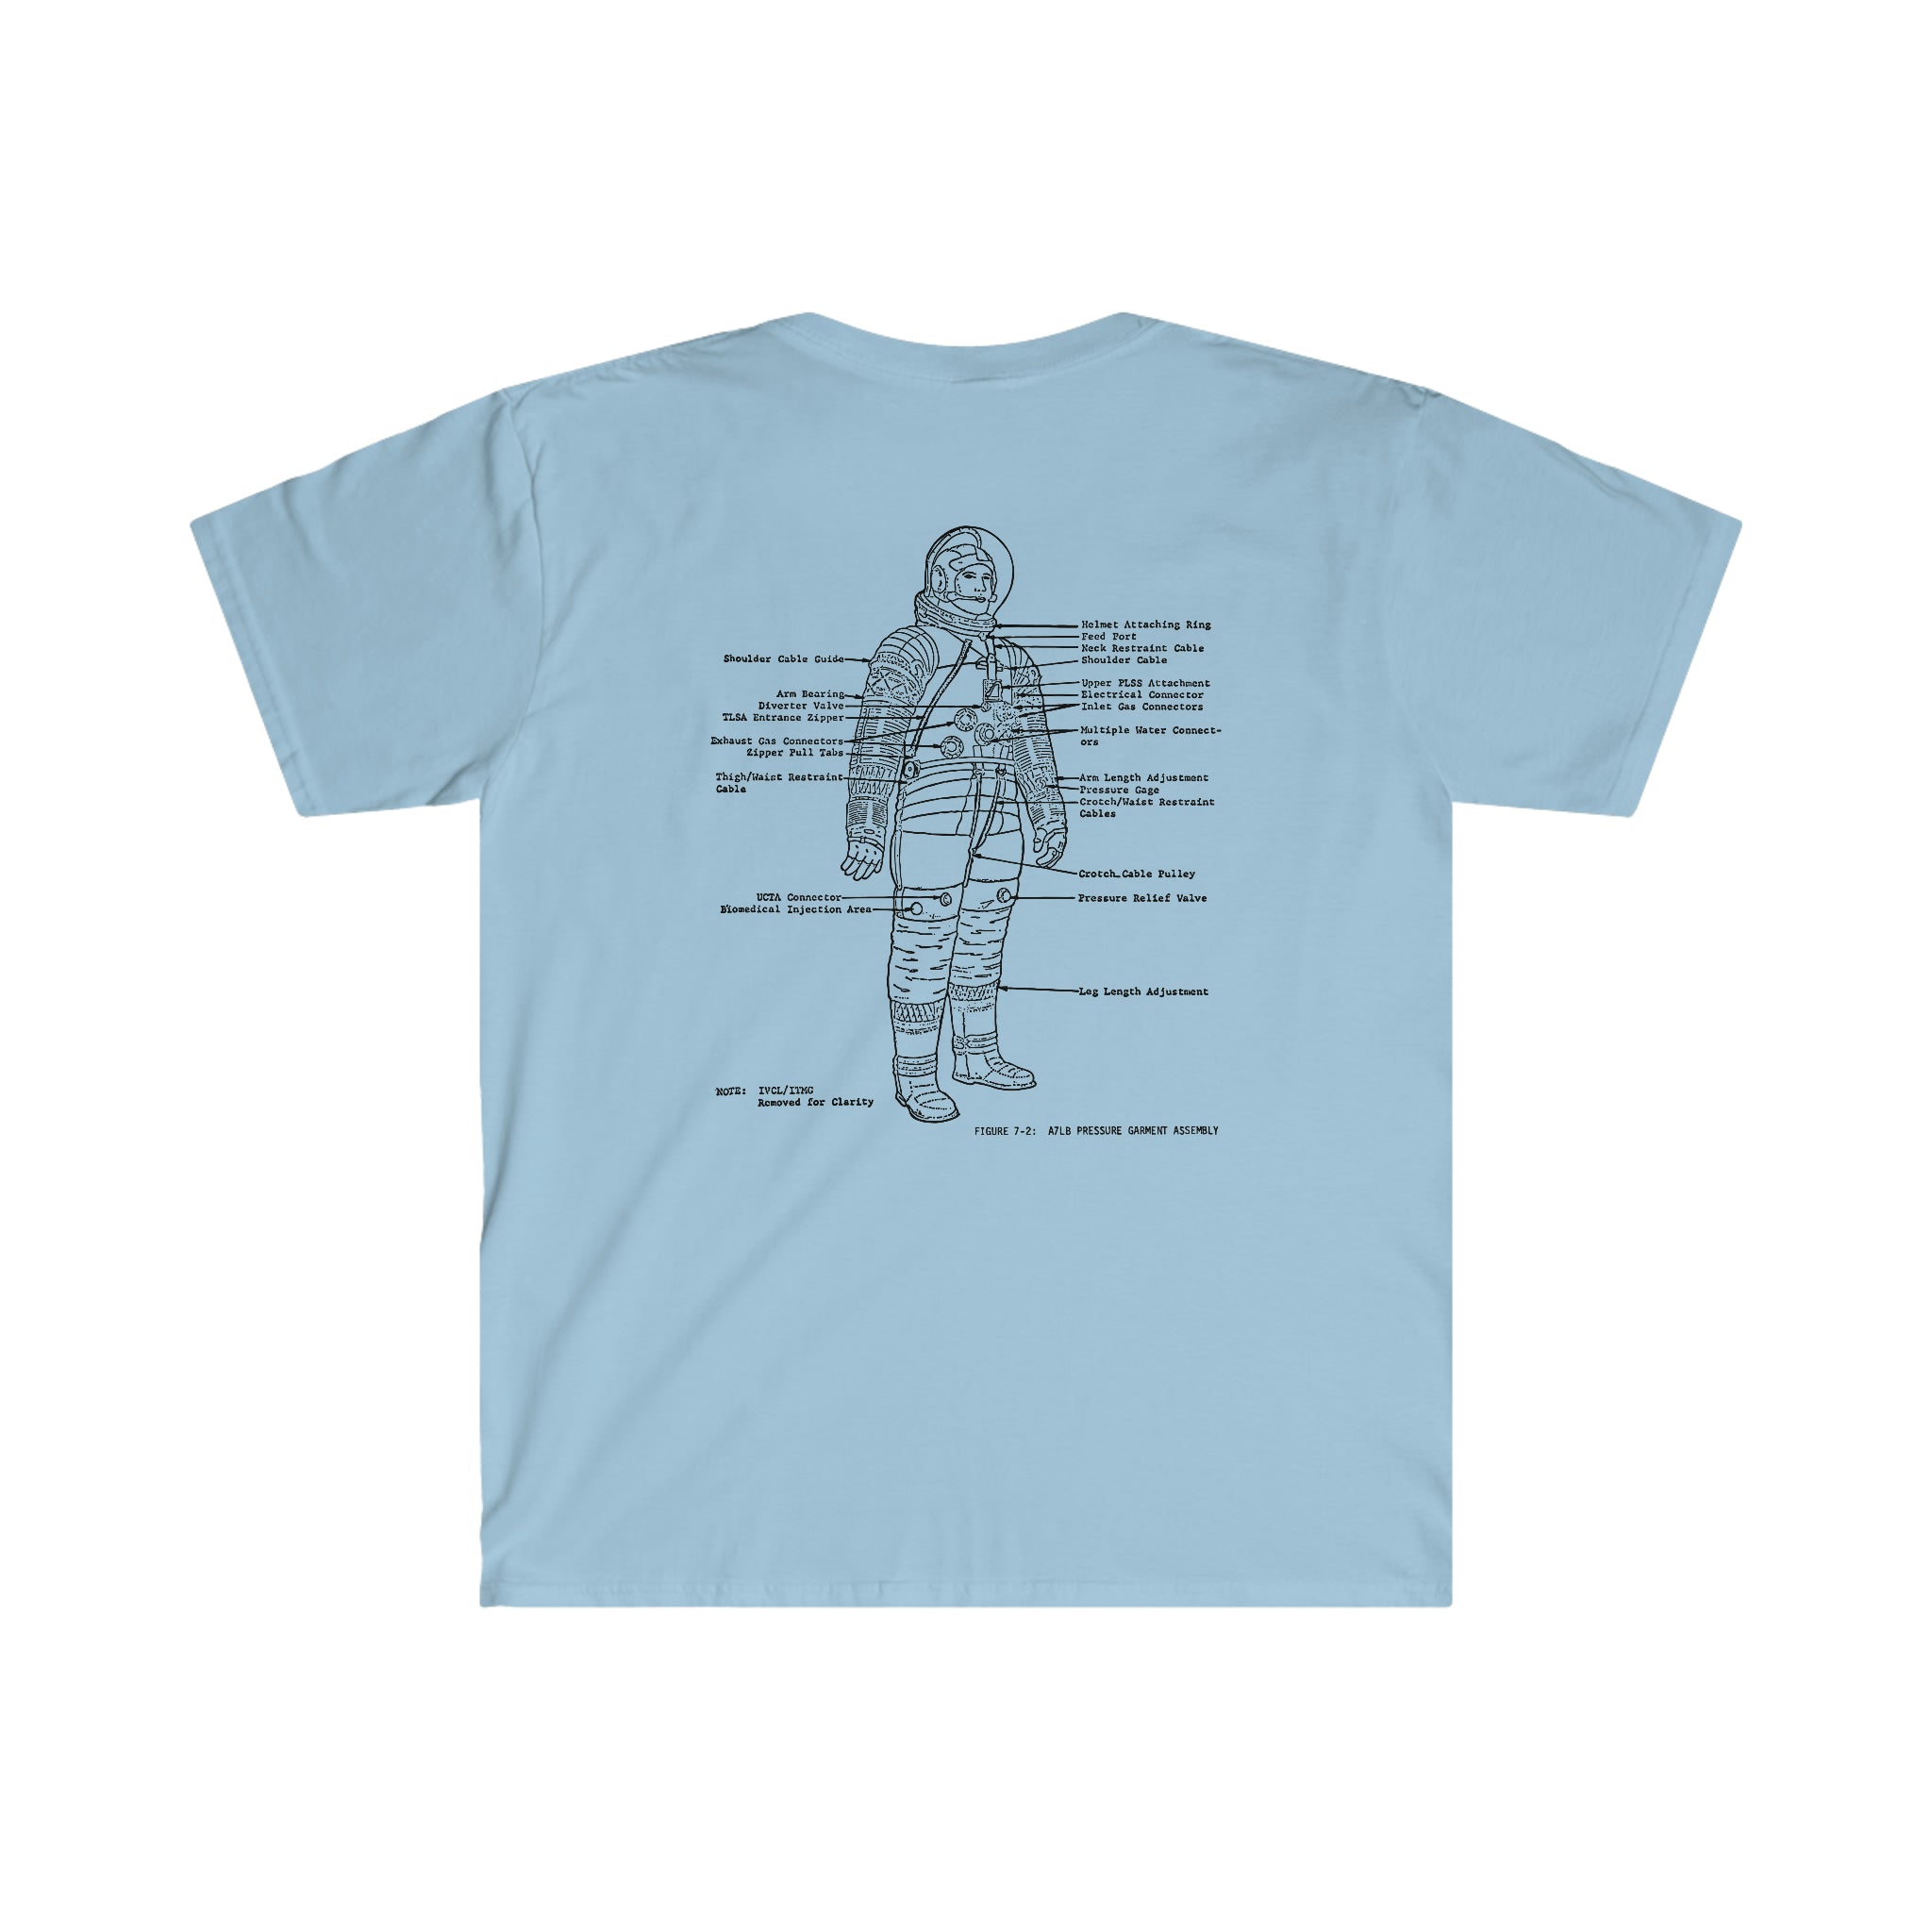 A Save Me From Space T-Shirt, perfect for space enthusiasts.